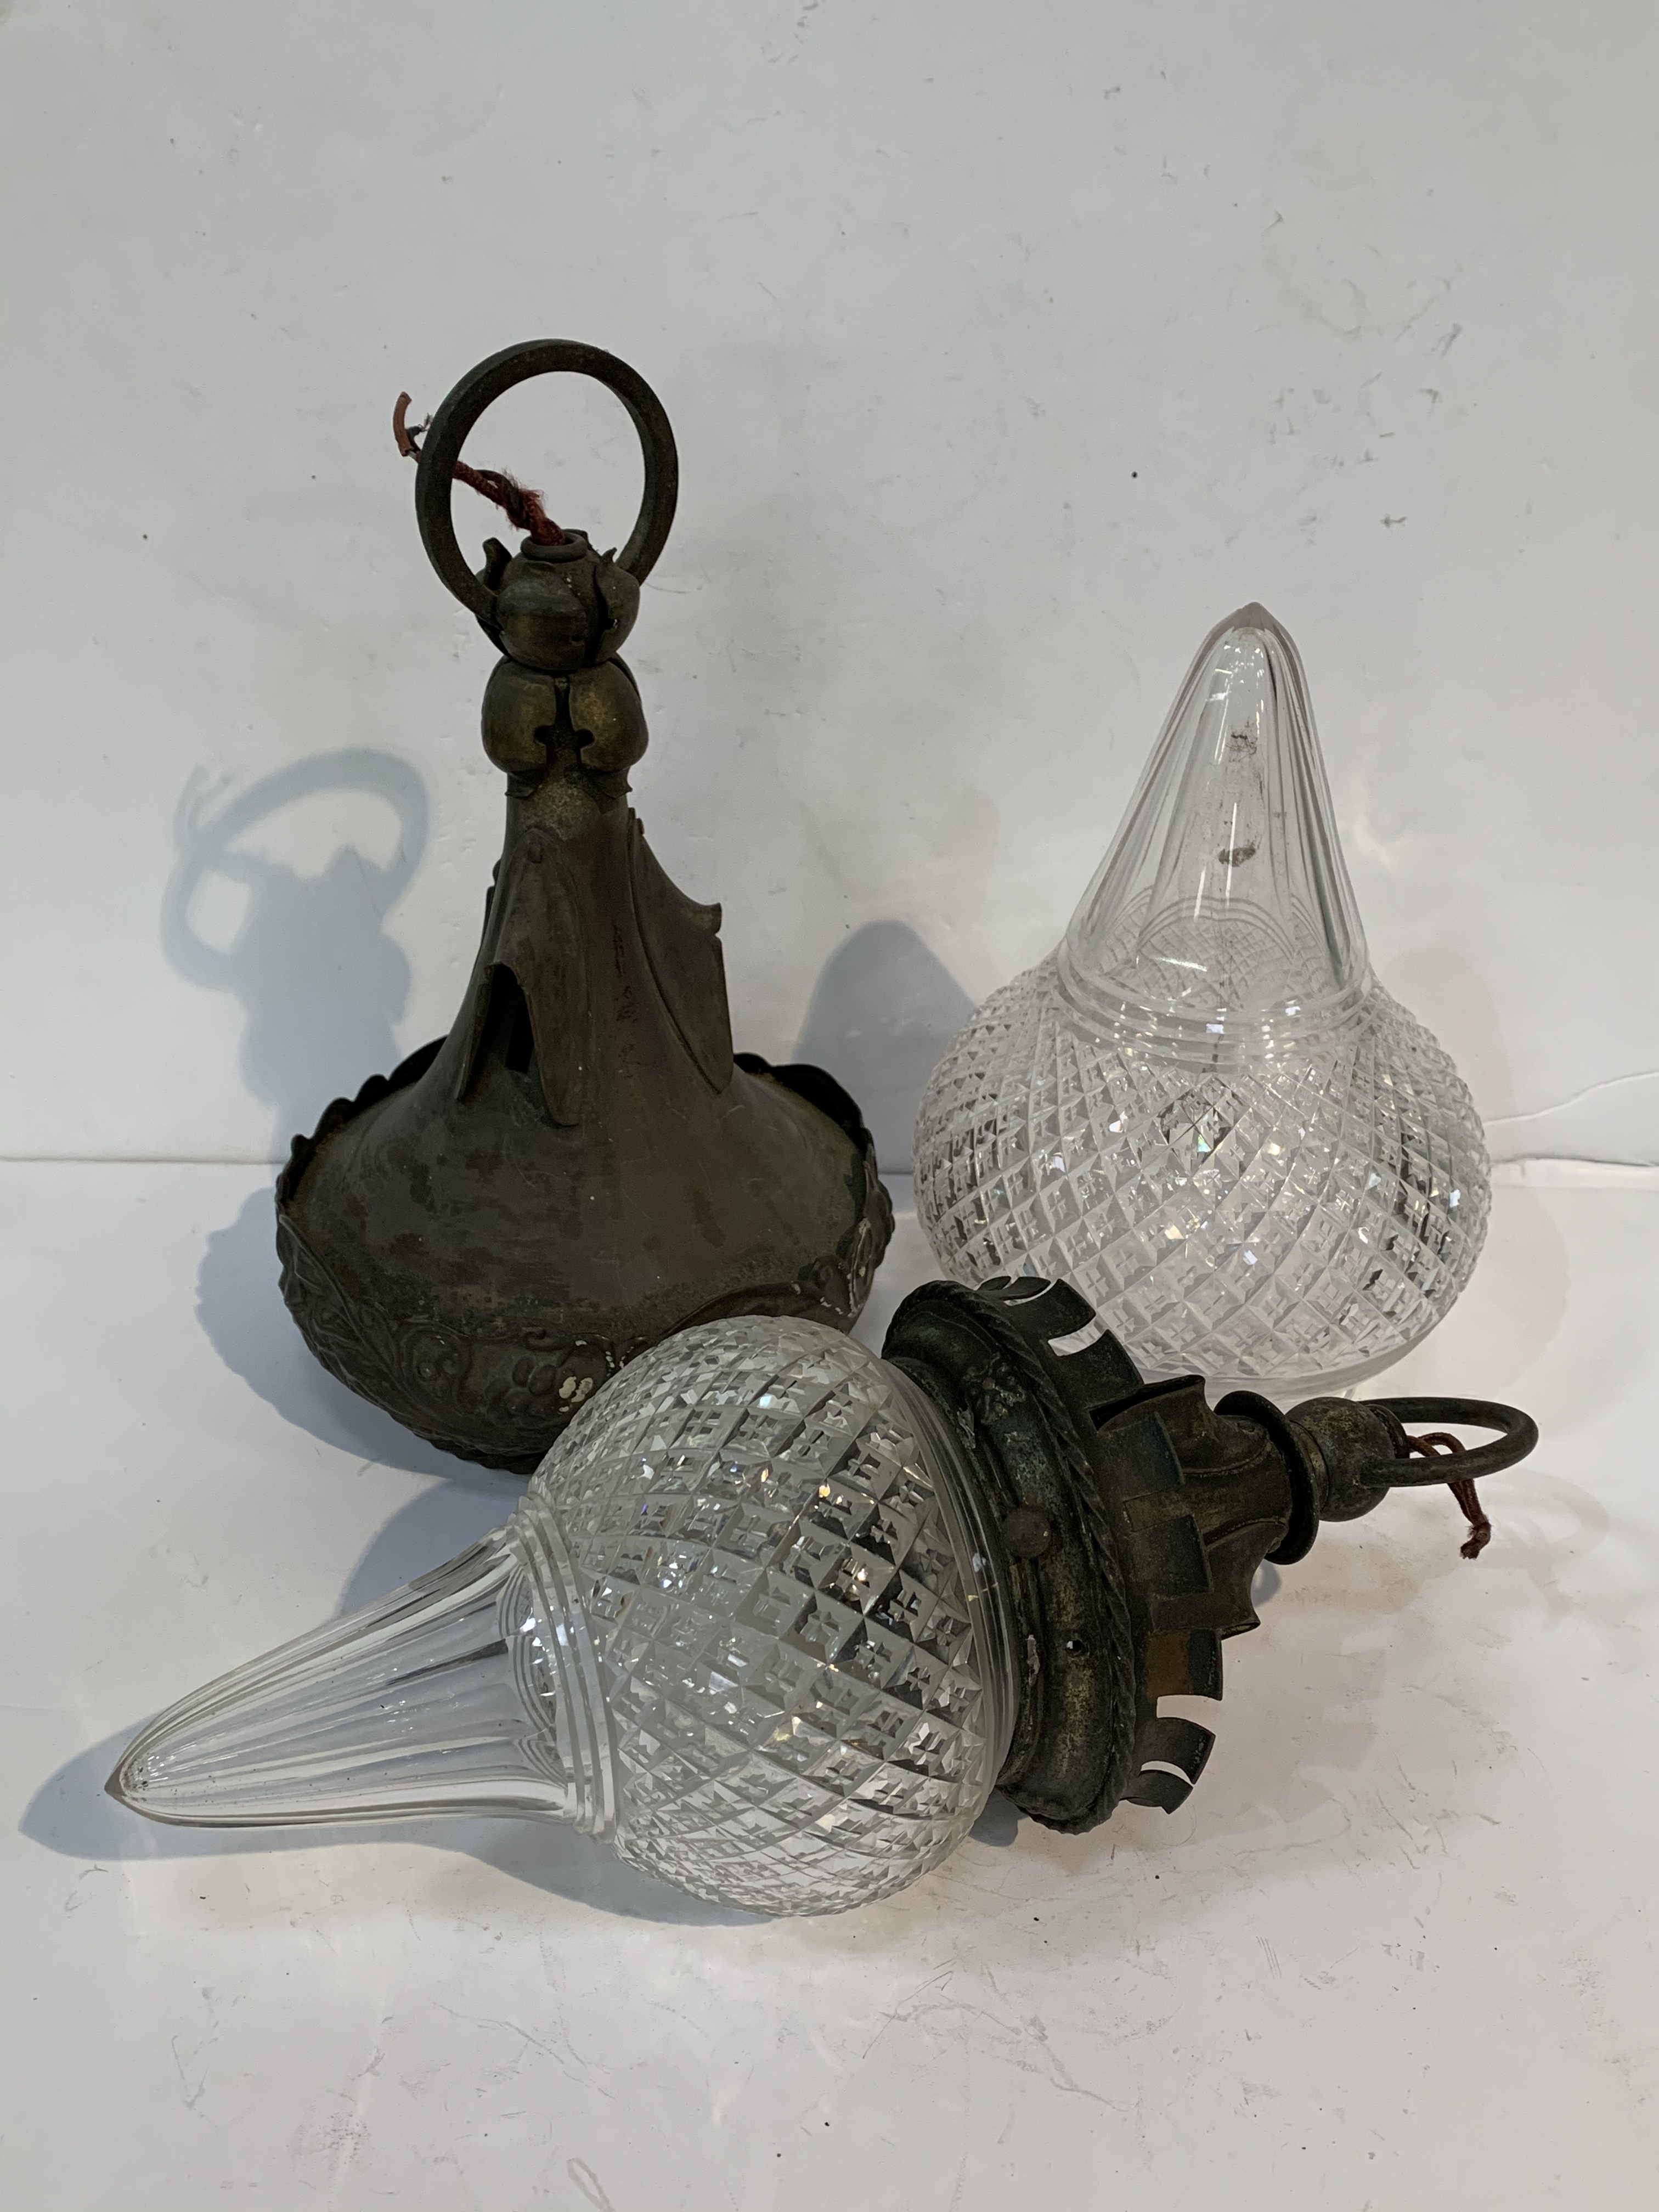 2 decorative metal and glass ceiling lights